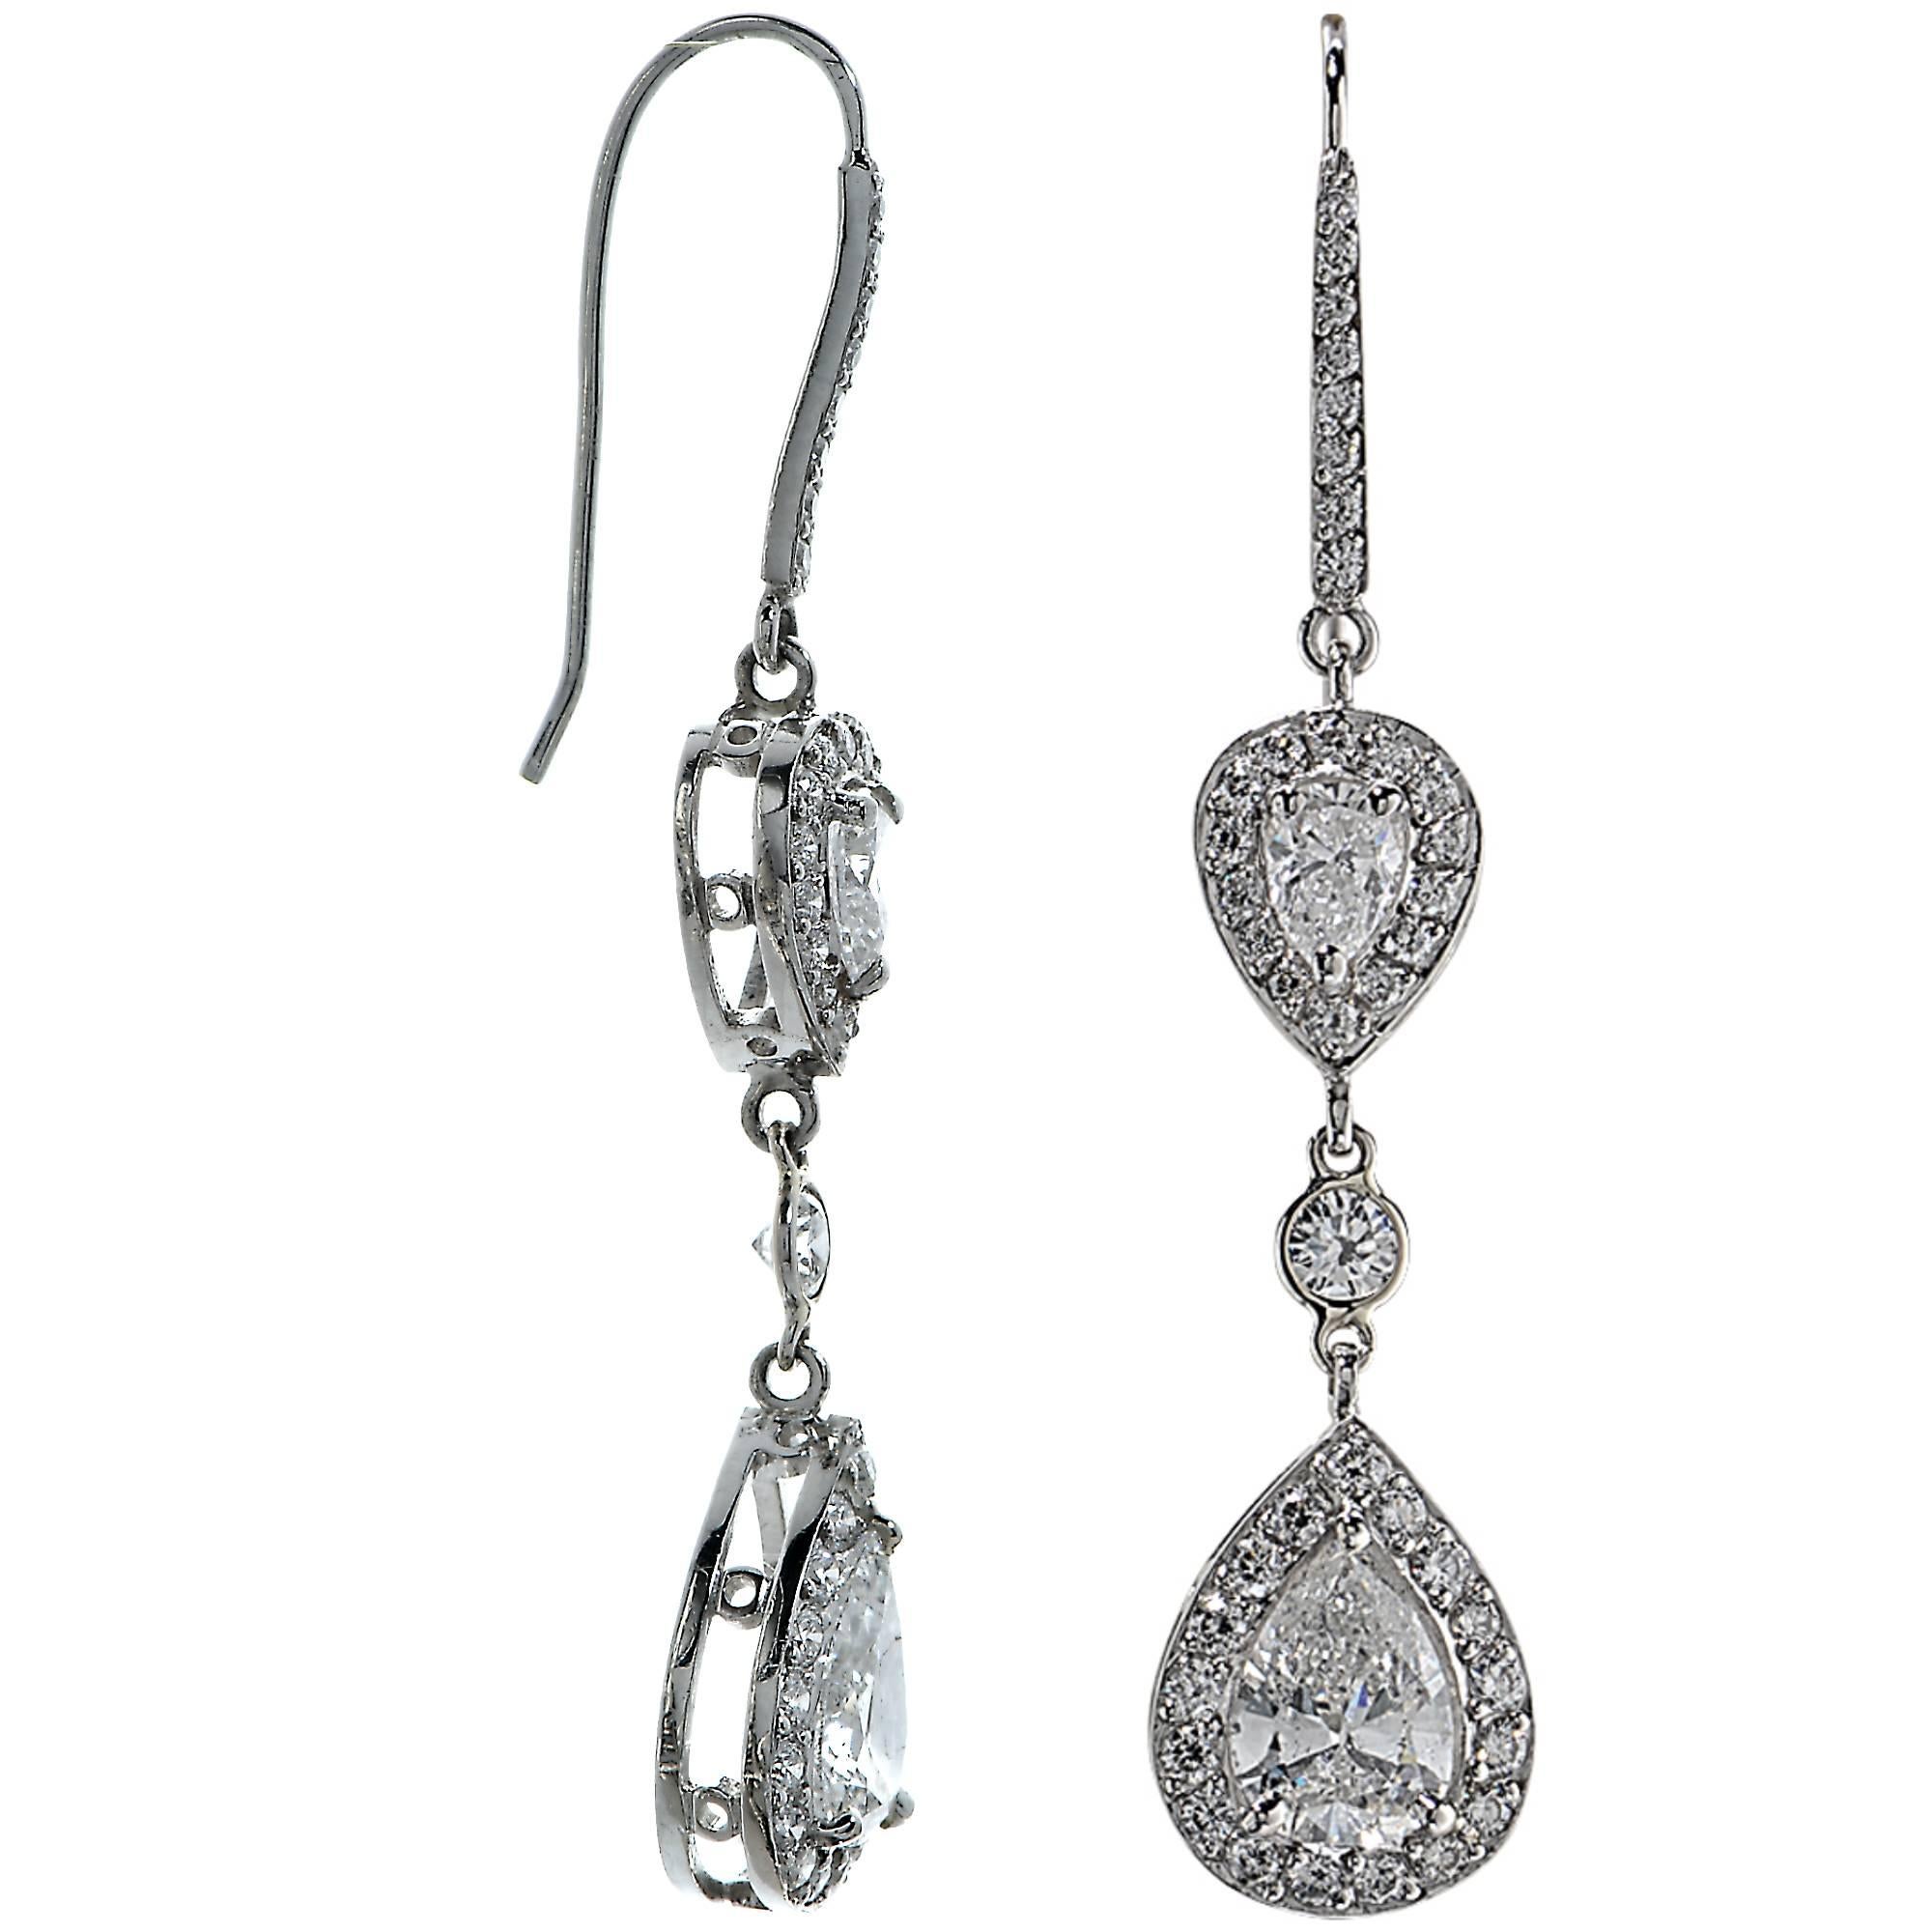 These lively platinum custom-made earrings features two pear shape diamonds weighing 3.02 carats total, E color, SI2-3 clarity and are accented by 2.03 carats of pear shape and round brilliant cut diamonds, G color, VS clarity.

Measurements are